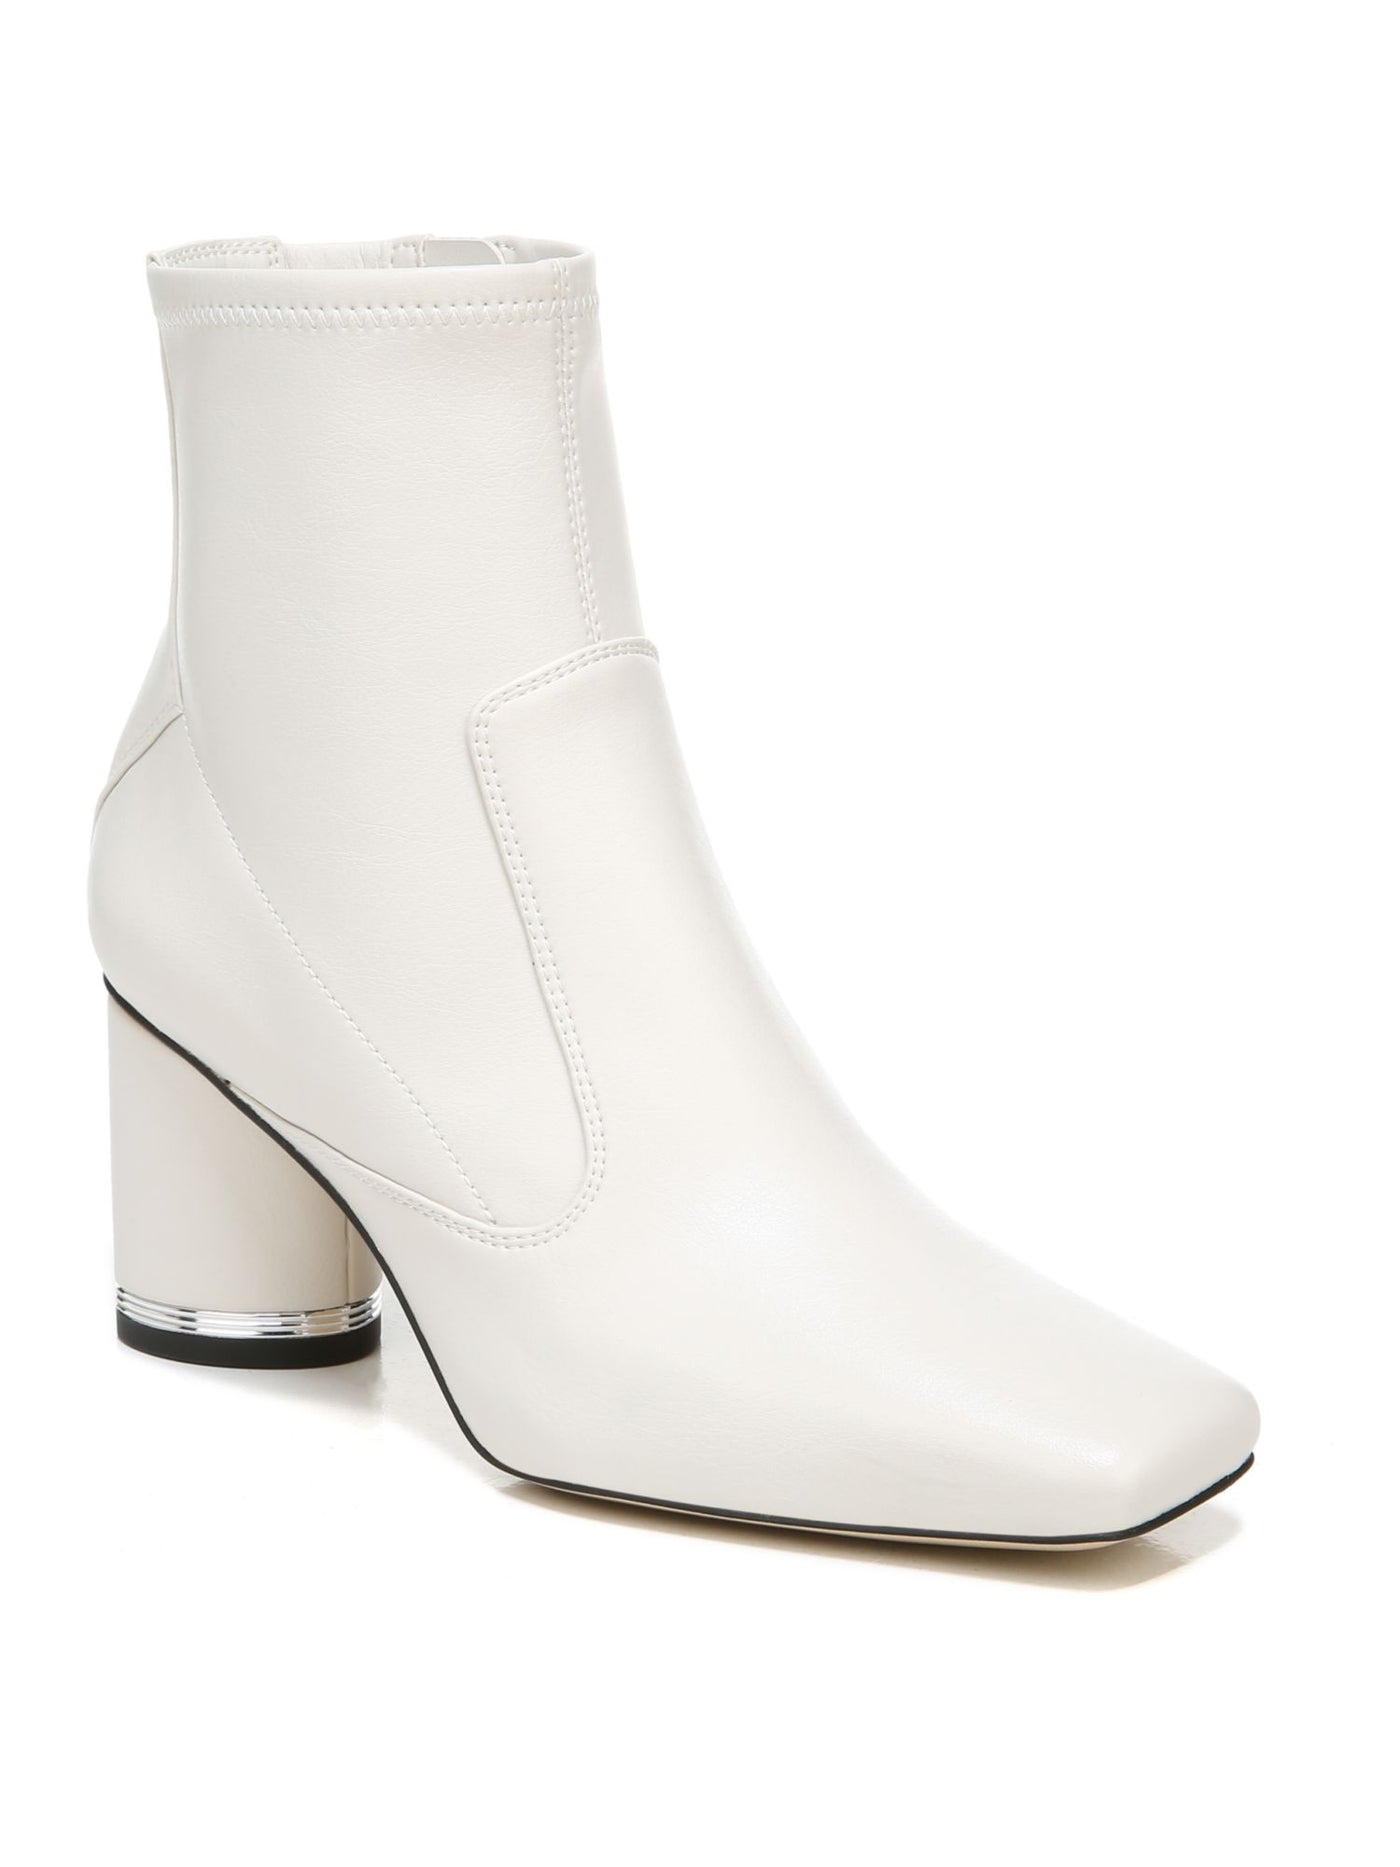 FRANCO SARTO Womens Ivory Heel Accent Cushioned Marquee Square Toe Block Heel Zip-Up Leather Dress Booties 10